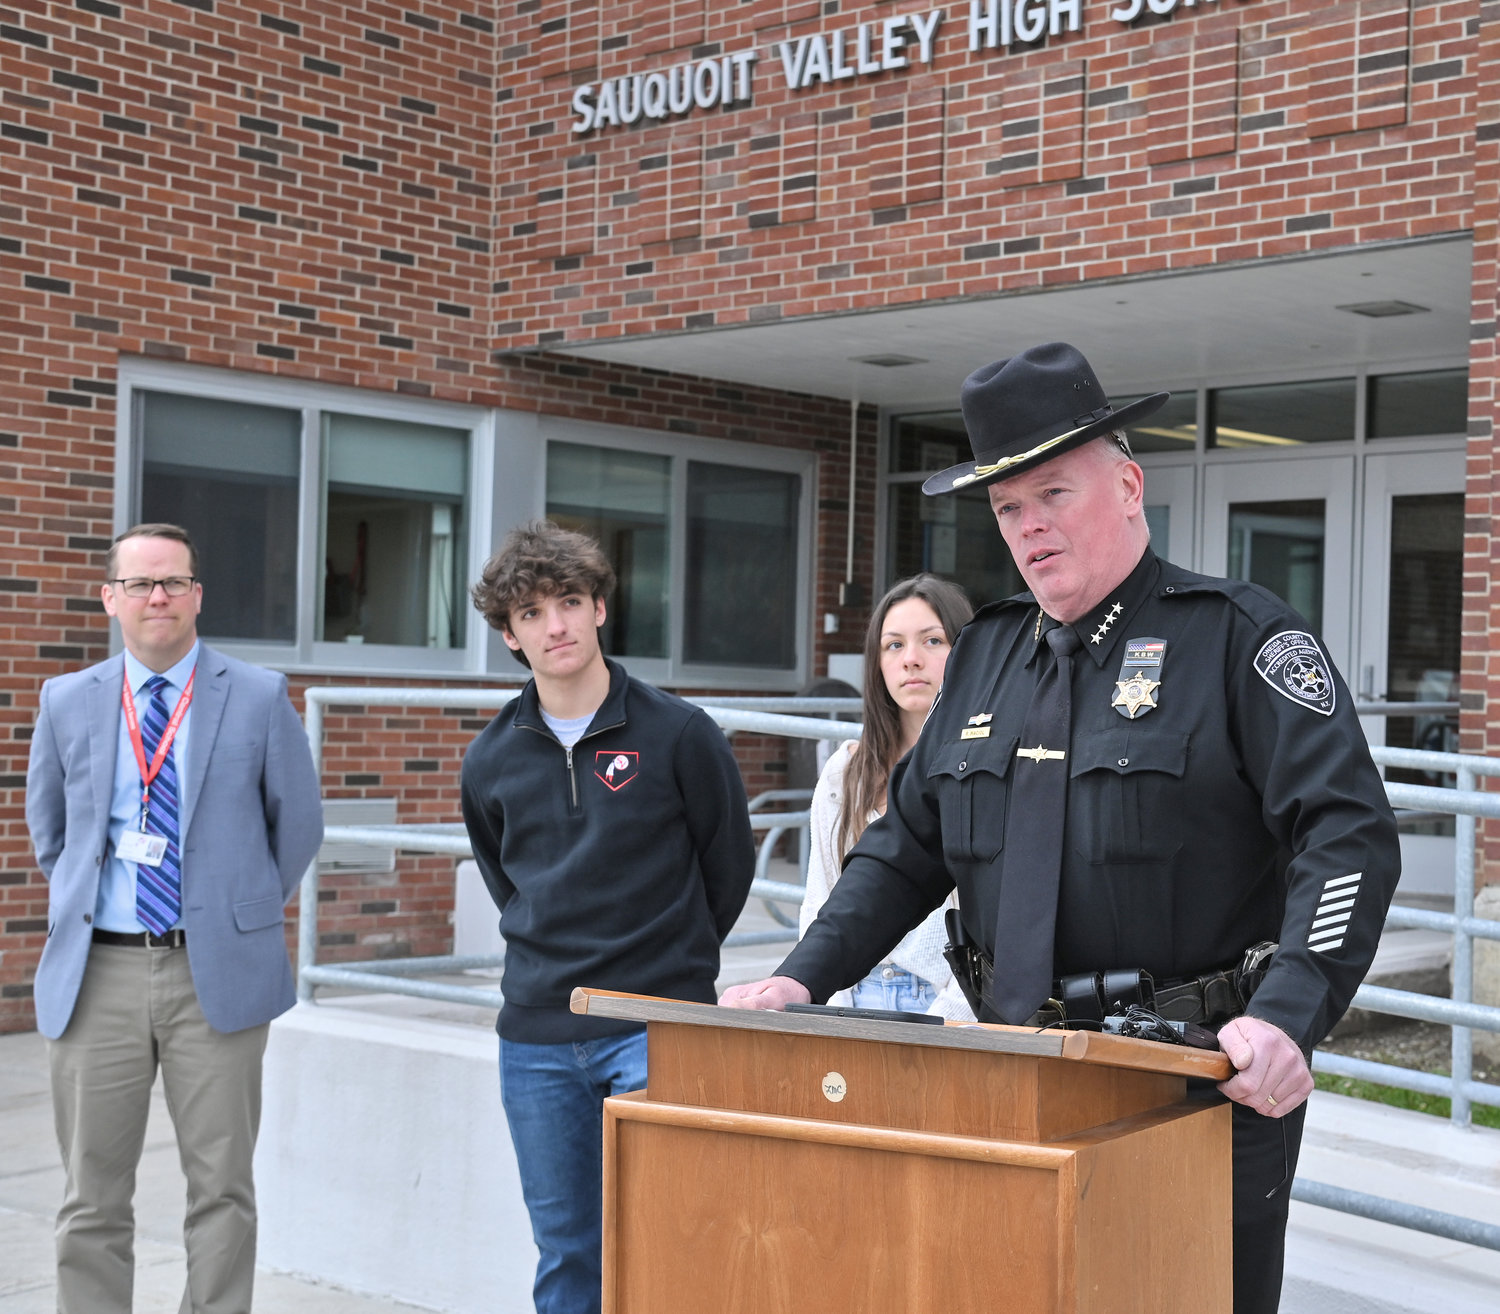 NO EMPTY CHAIR — Oneida County Sheriff Robert M. Maciol joined Sauquoit Valley High School students Friday morning to announce the upcoming No Empty Chair Campaign next week. From left: Principal Brian Read, senior class president Benjamin LoGalbo, student council president Alena Weibel, and Maciol.